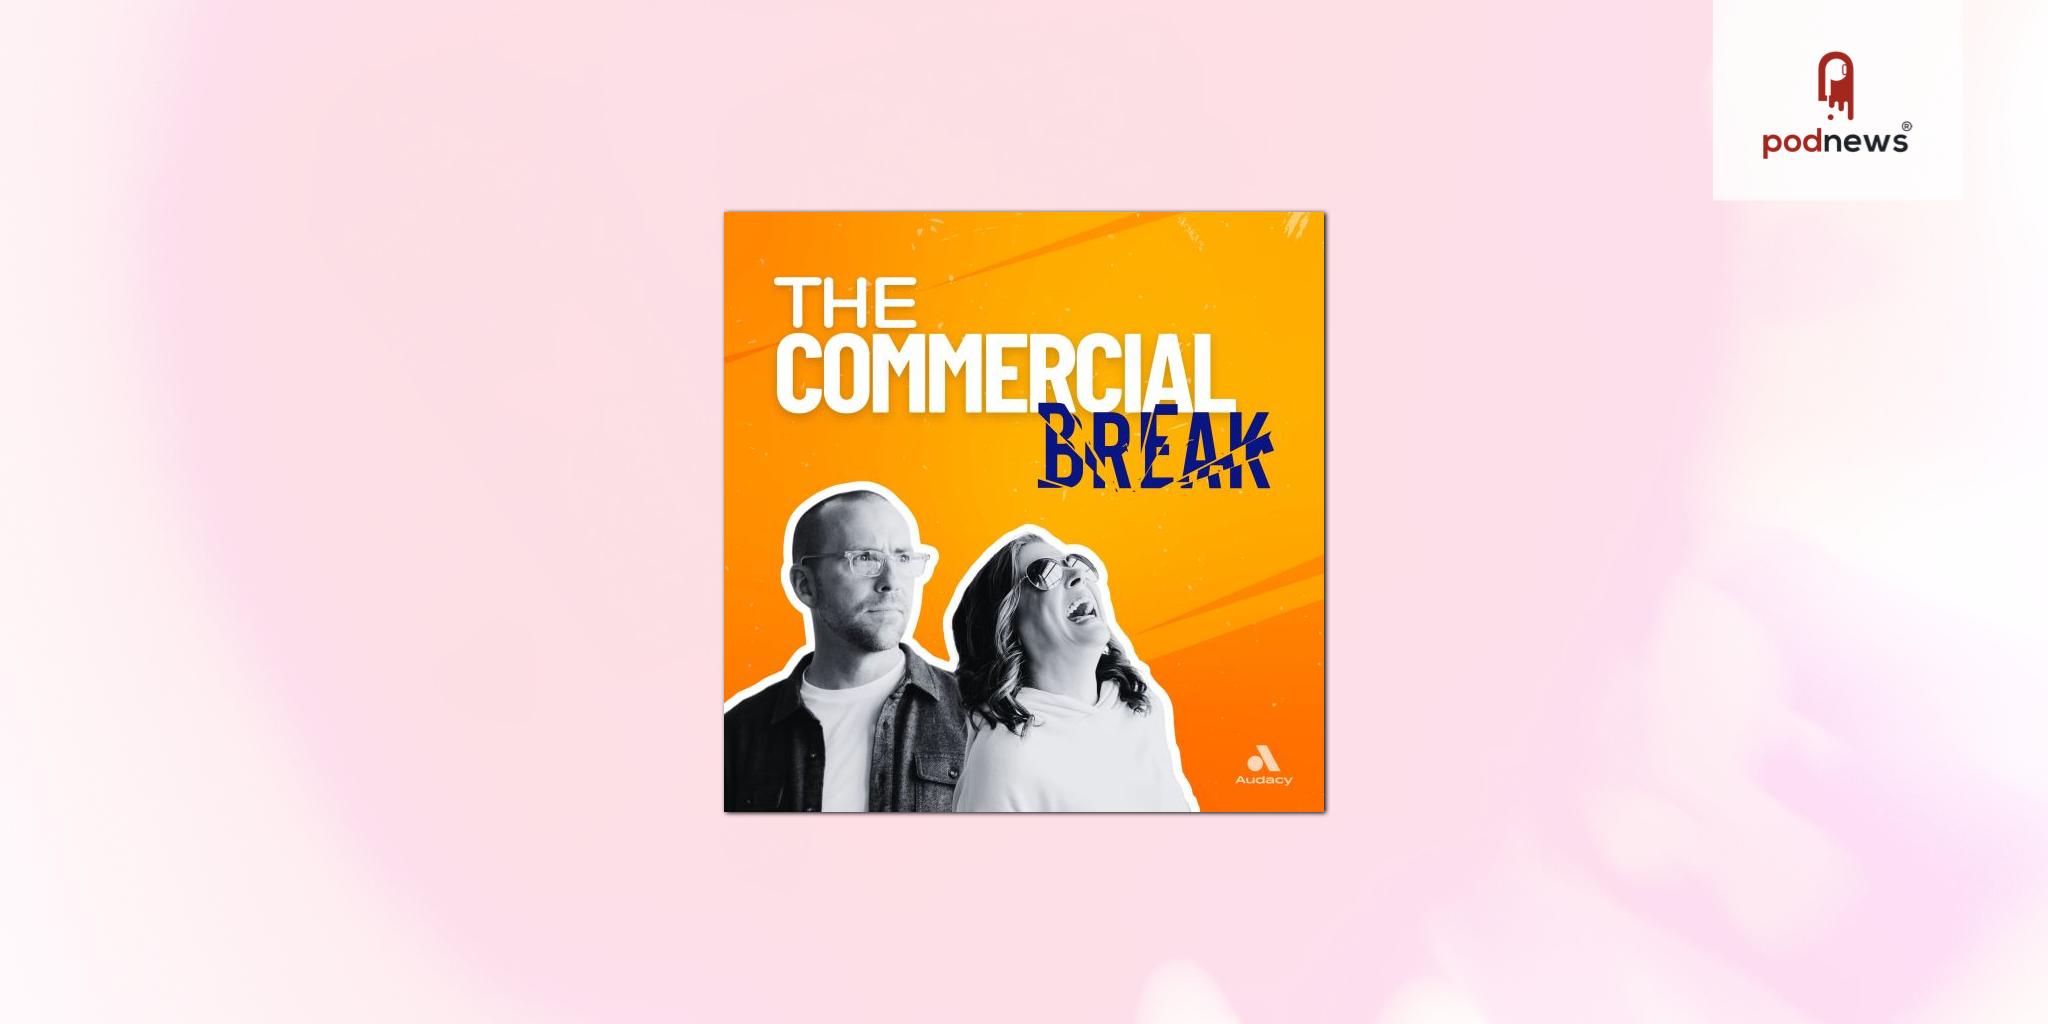 Libsyn’s AdvertiseCast Re-Ups Exclusive Ad Partnership with improv comedy show The Commercial Break